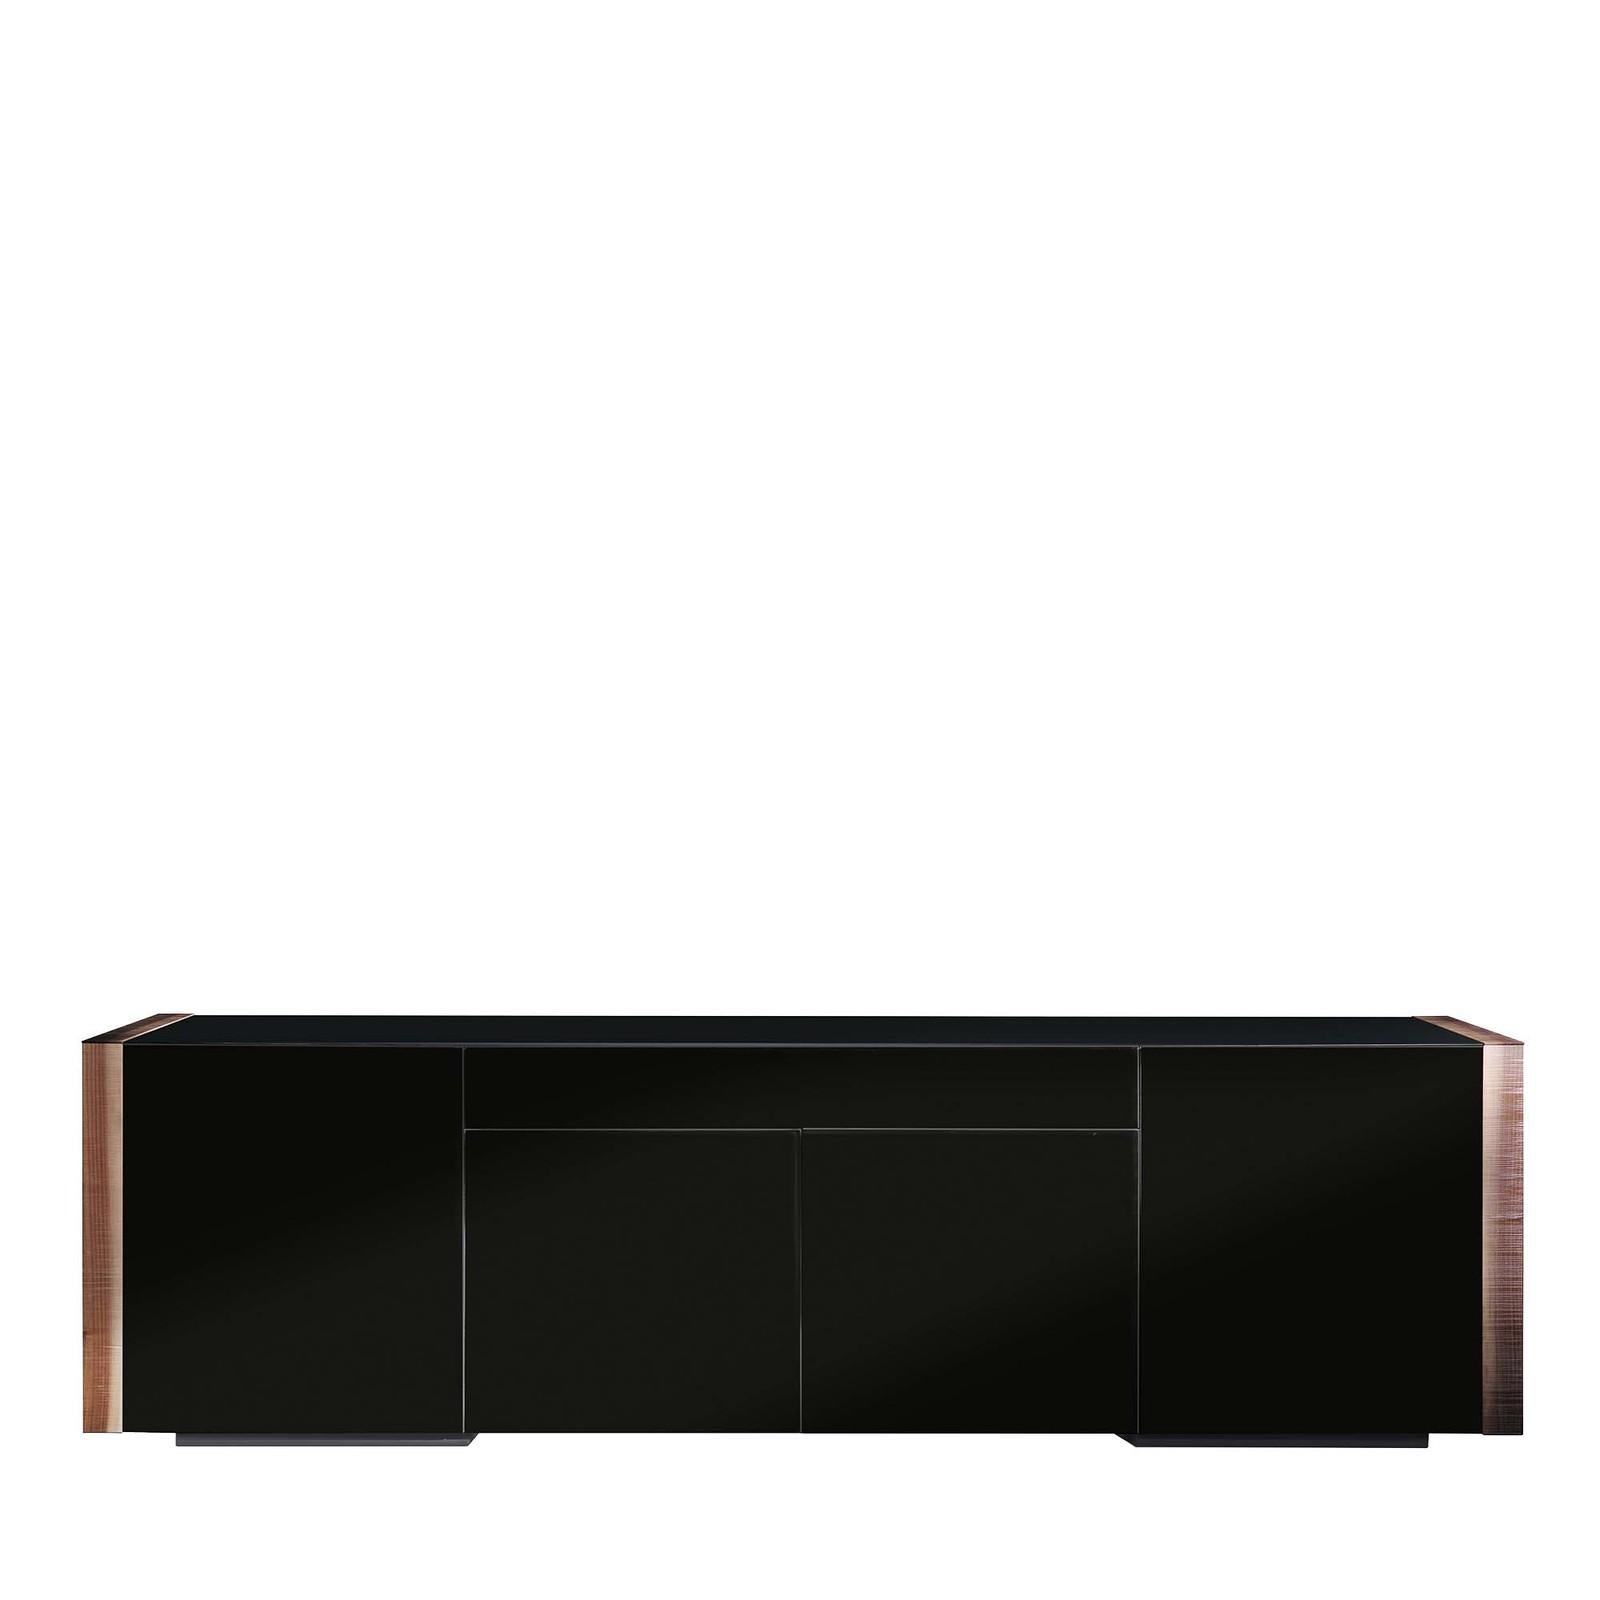 This sideboard's strong and modern personality blends storage capacity with an essential silhouette raised on two low block feet. Composed of four soft-closing doors with internal shelves and one long central top drawer, this cabinet showcases a